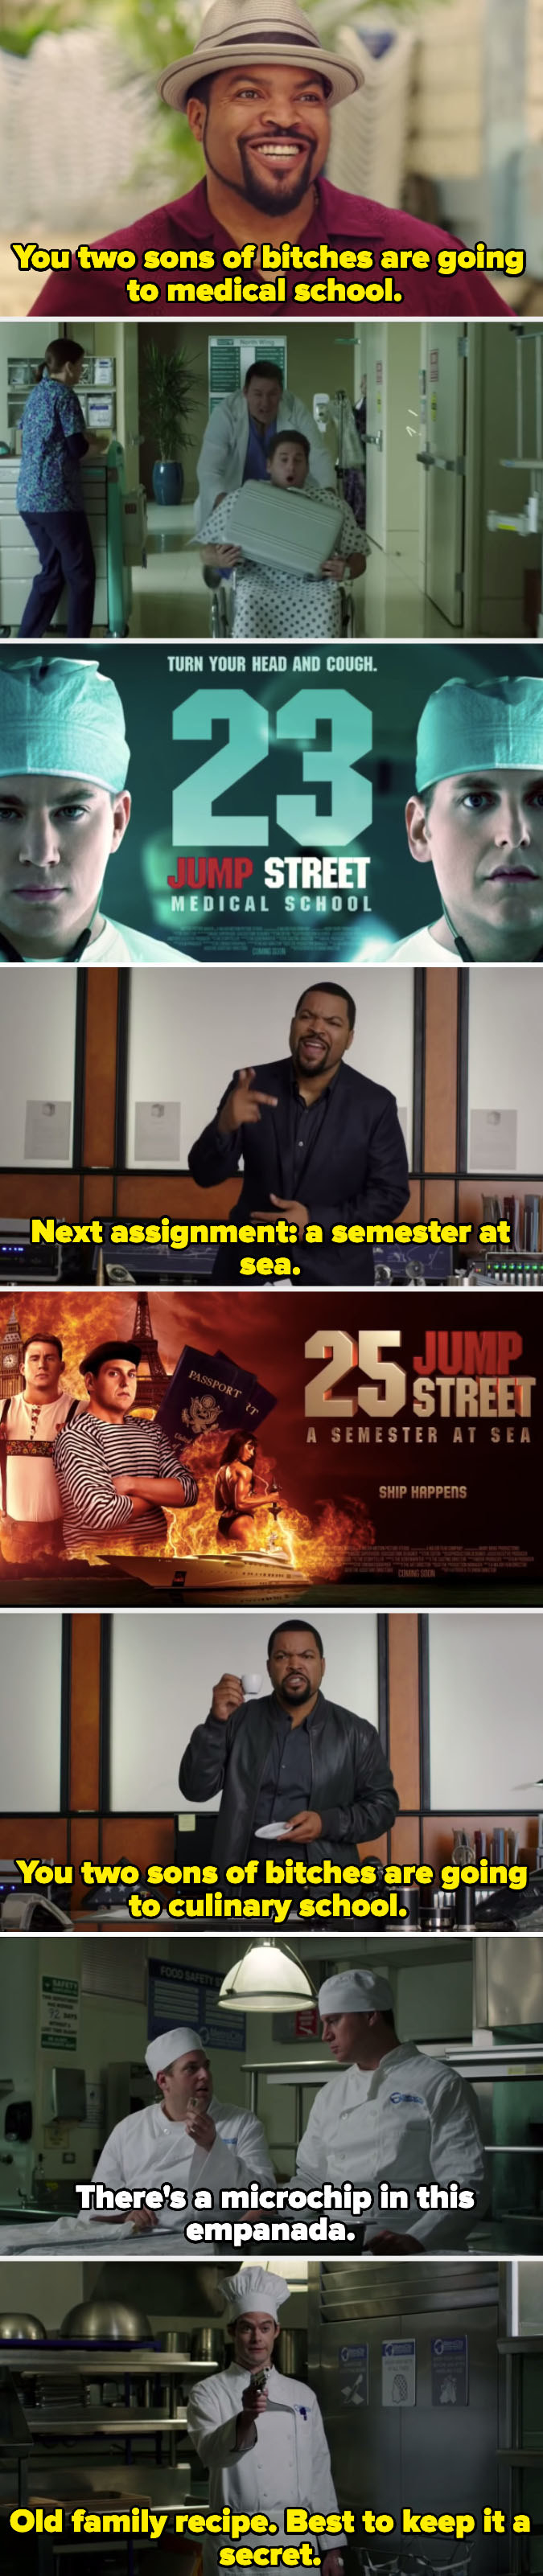 Hypothetical scenes follow Ice Cube as Captain Dickson saying, &quot;You two sons of bitches are going to medical school,&quot; &quot;Next assignment: a semester at sea,&quot; and &quot;You two sons of bitches are going to culinary school&quot;